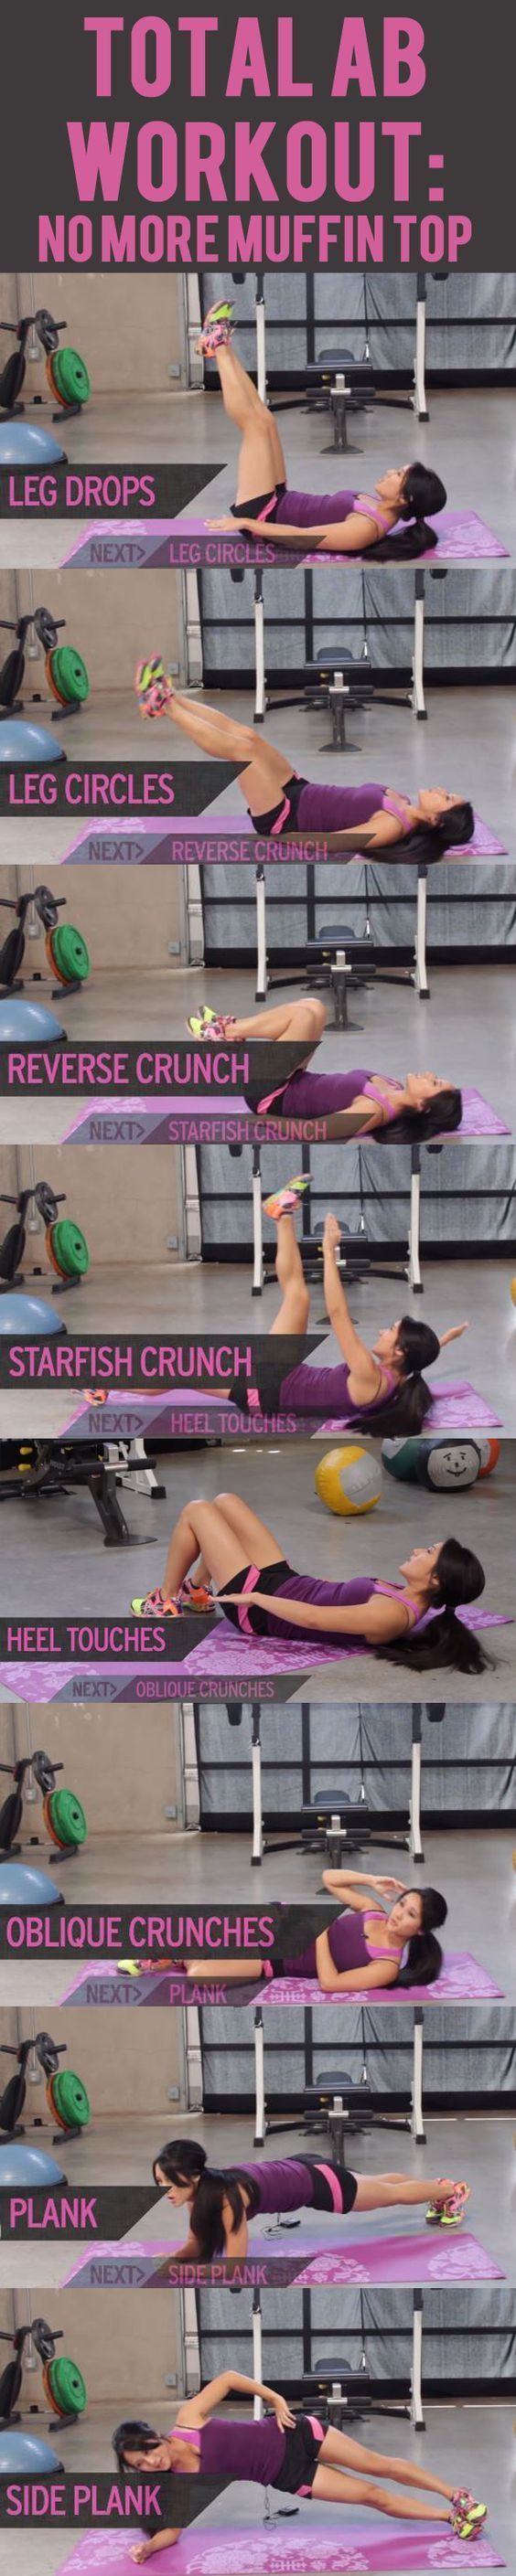 This workout will show you some of the best ab exercises for toning and slimming y